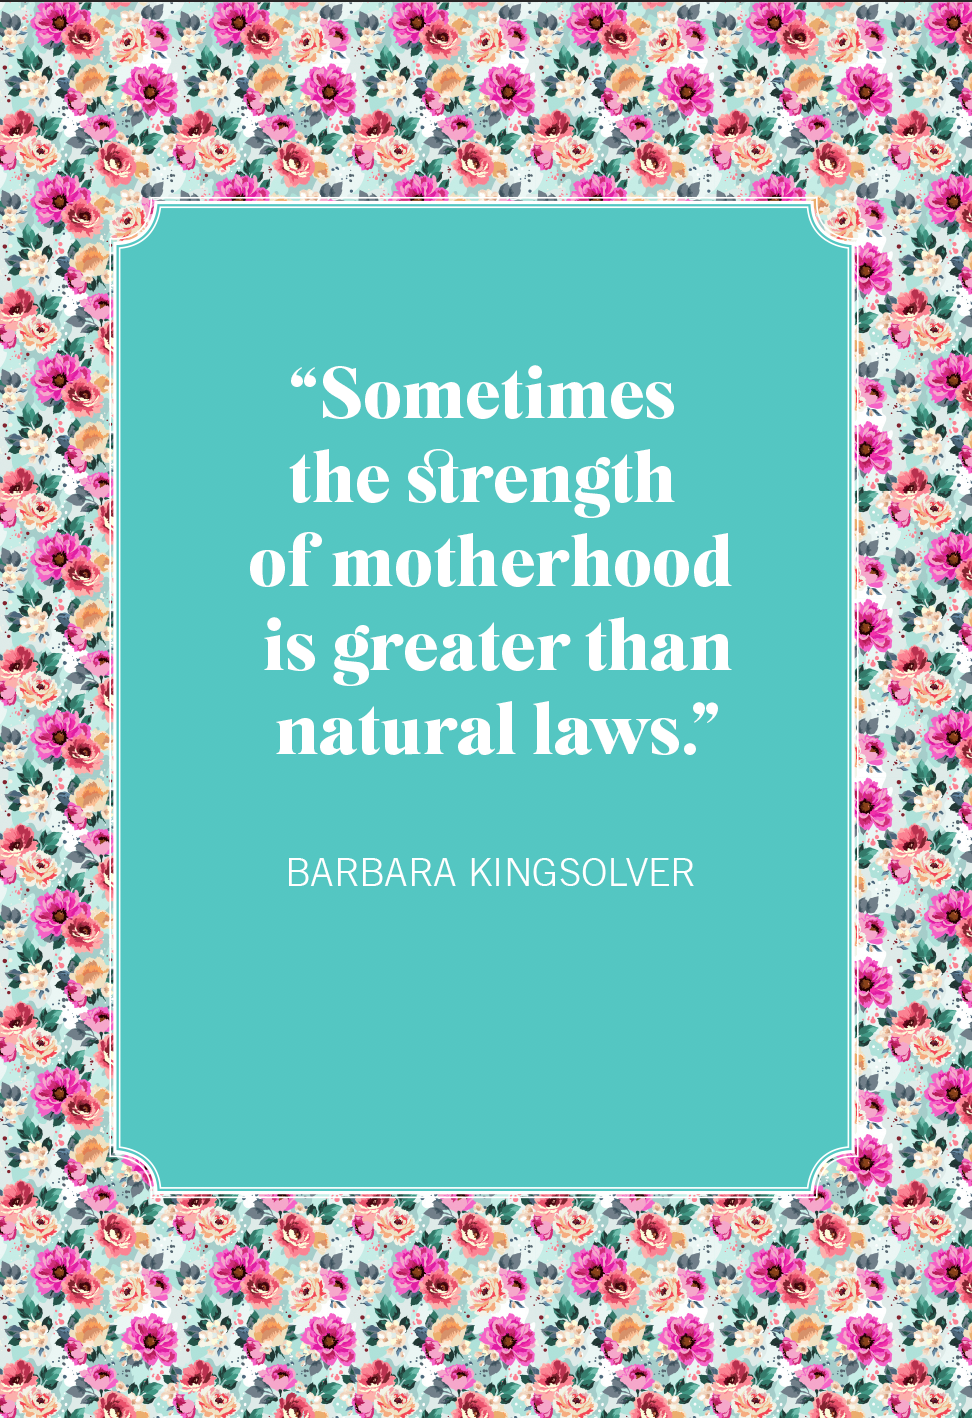 barbara kingsolver mothers day quotes